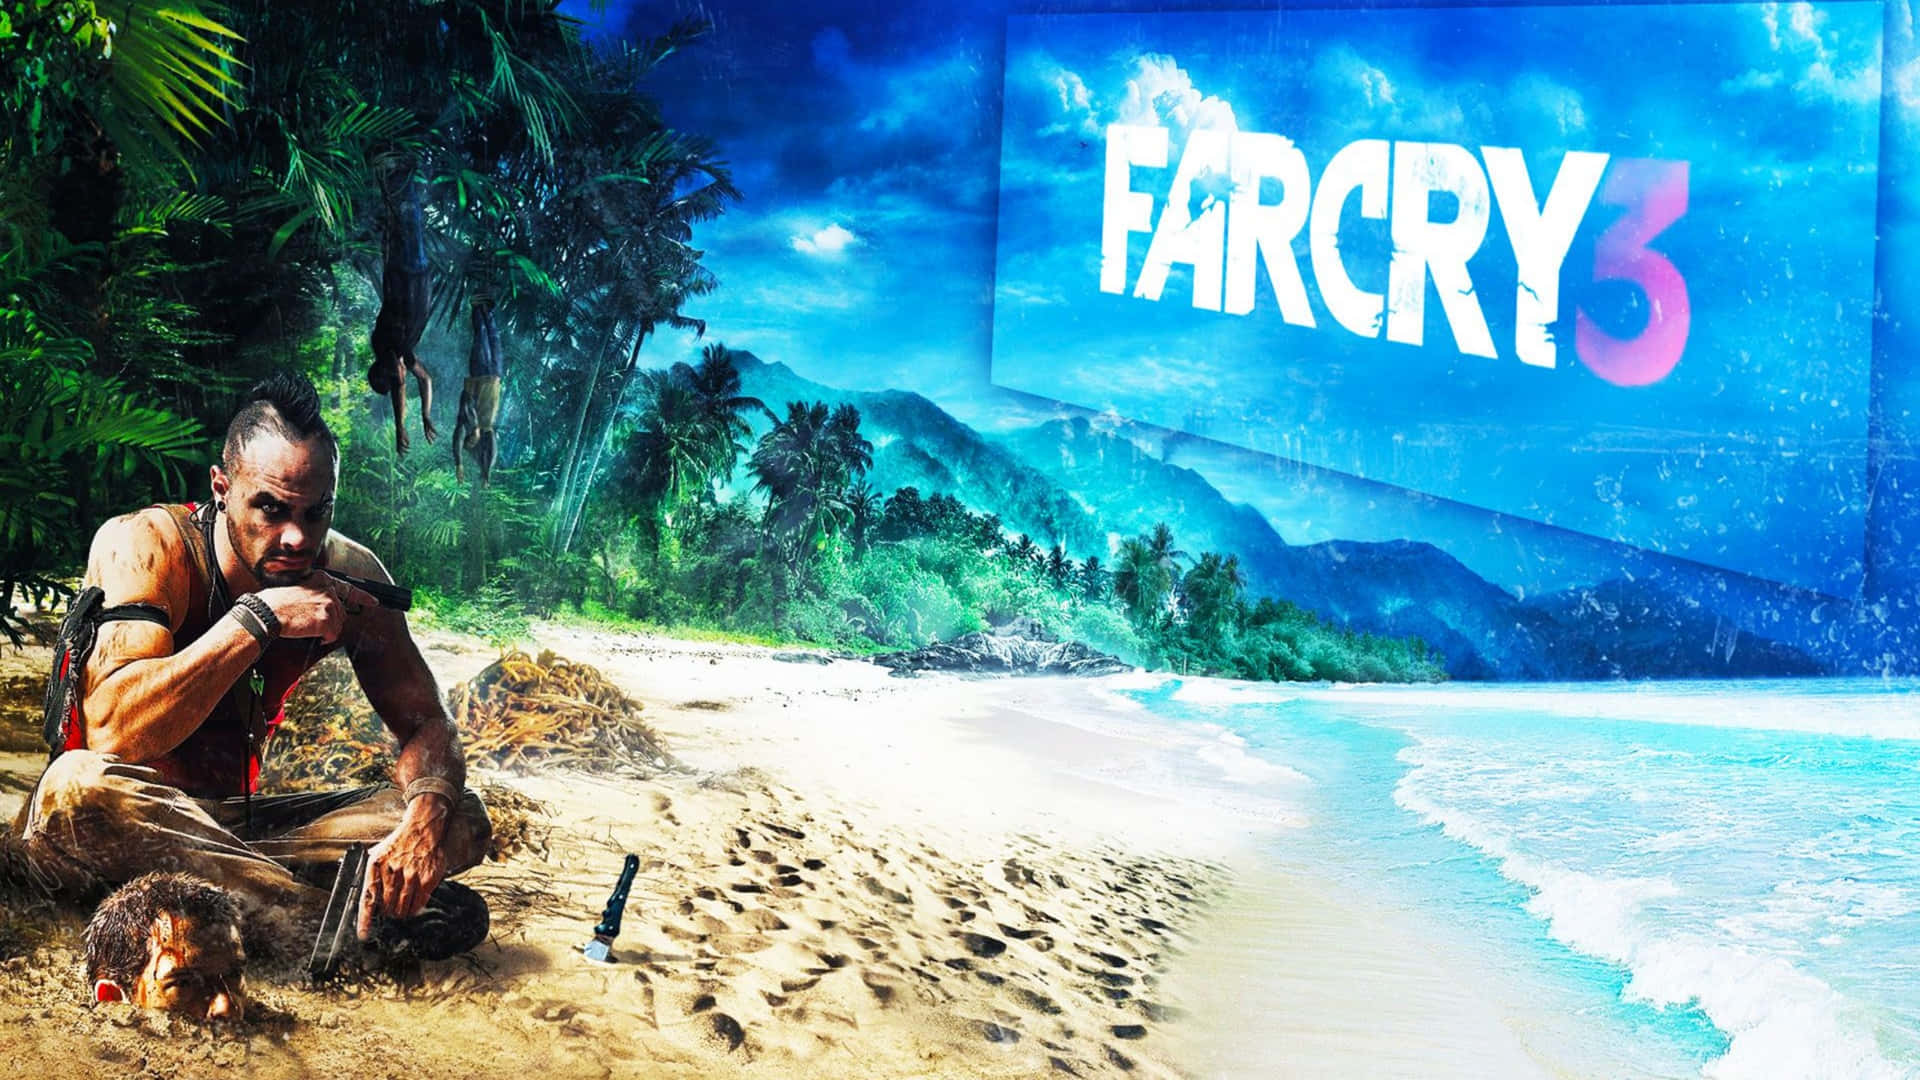 Spectacular Visuals from Far Cry 3 - 1440p Display